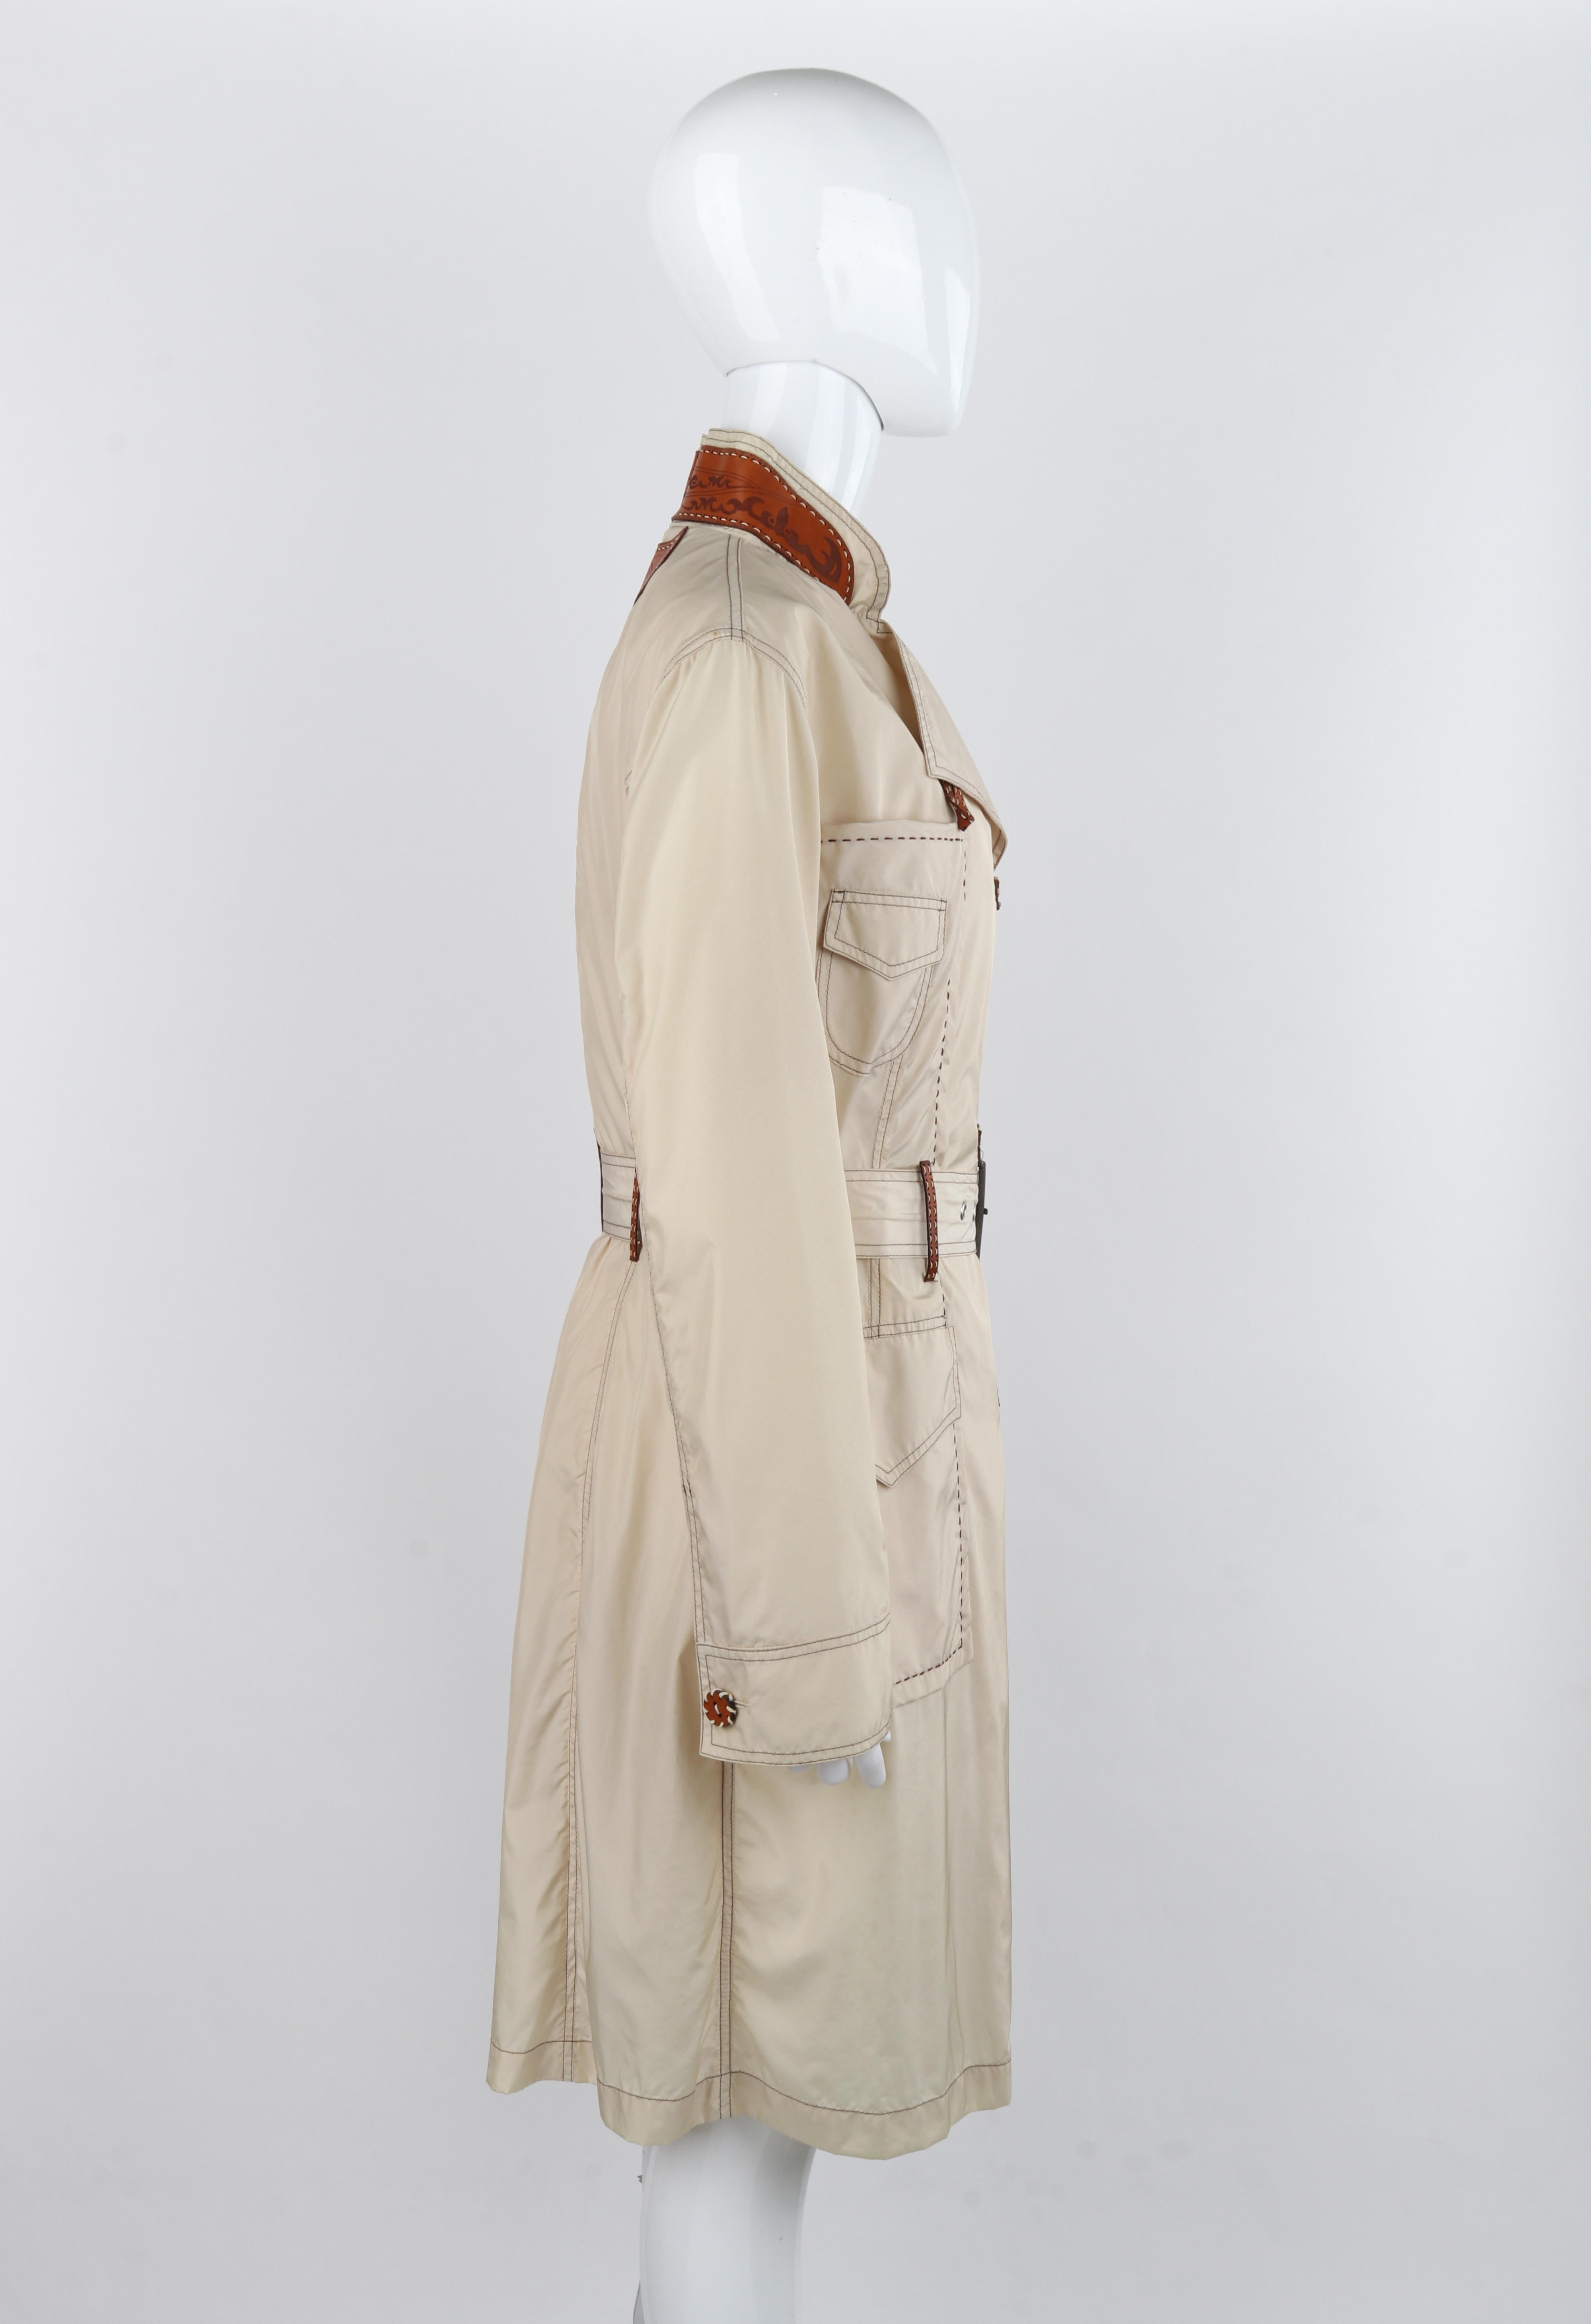 ALEXANDER McQUEEN c.1996 Vtg Beige Leather Accent Western Trench Coat Overcoat  In Good Condition For Sale In Thiensville, WI